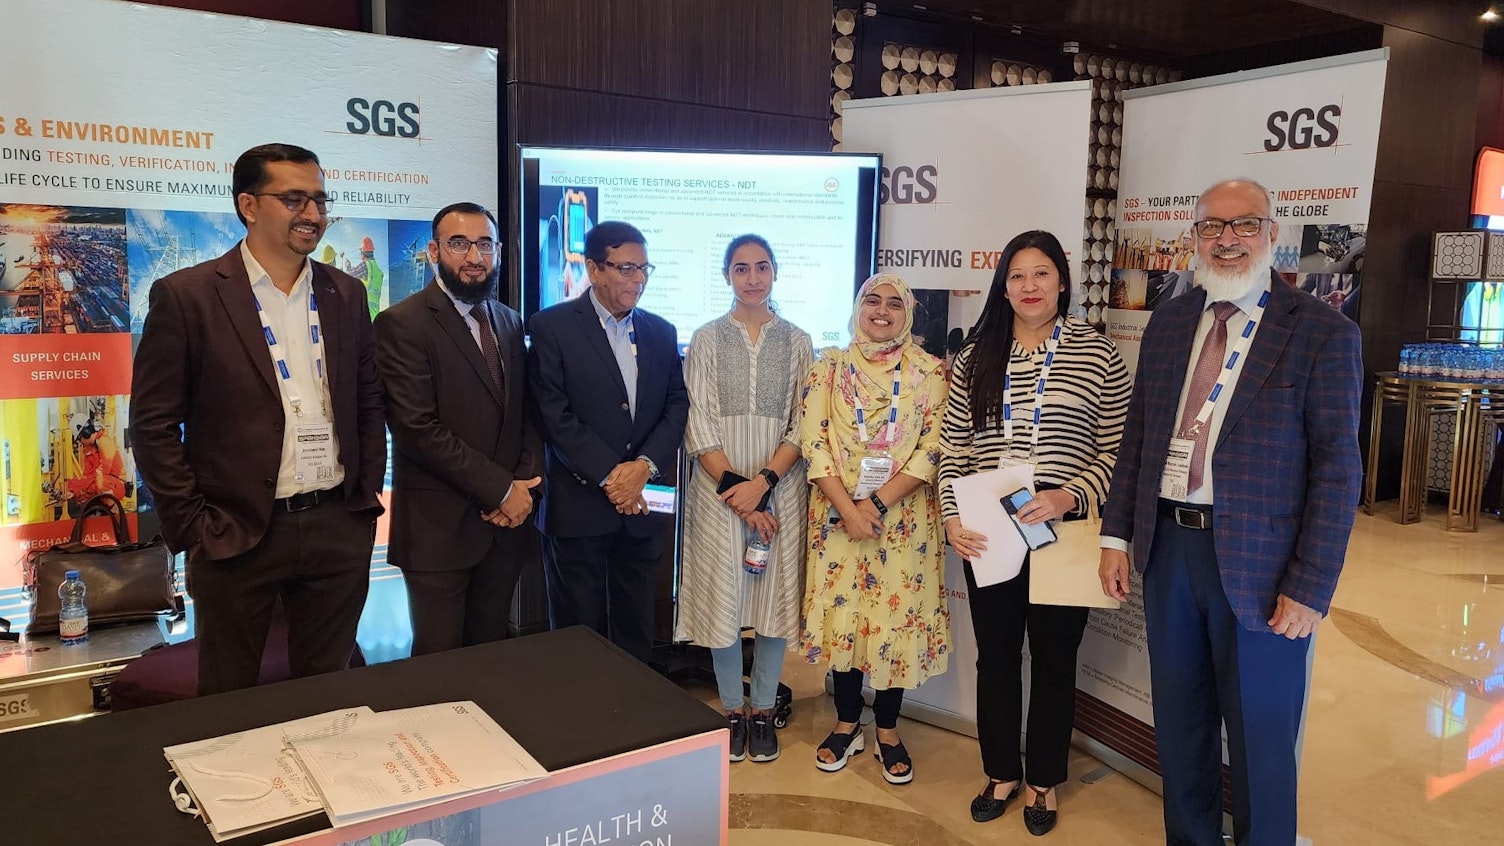 SGS Presented AIM Solutions at the Asset Integrity Management Conference in Doha